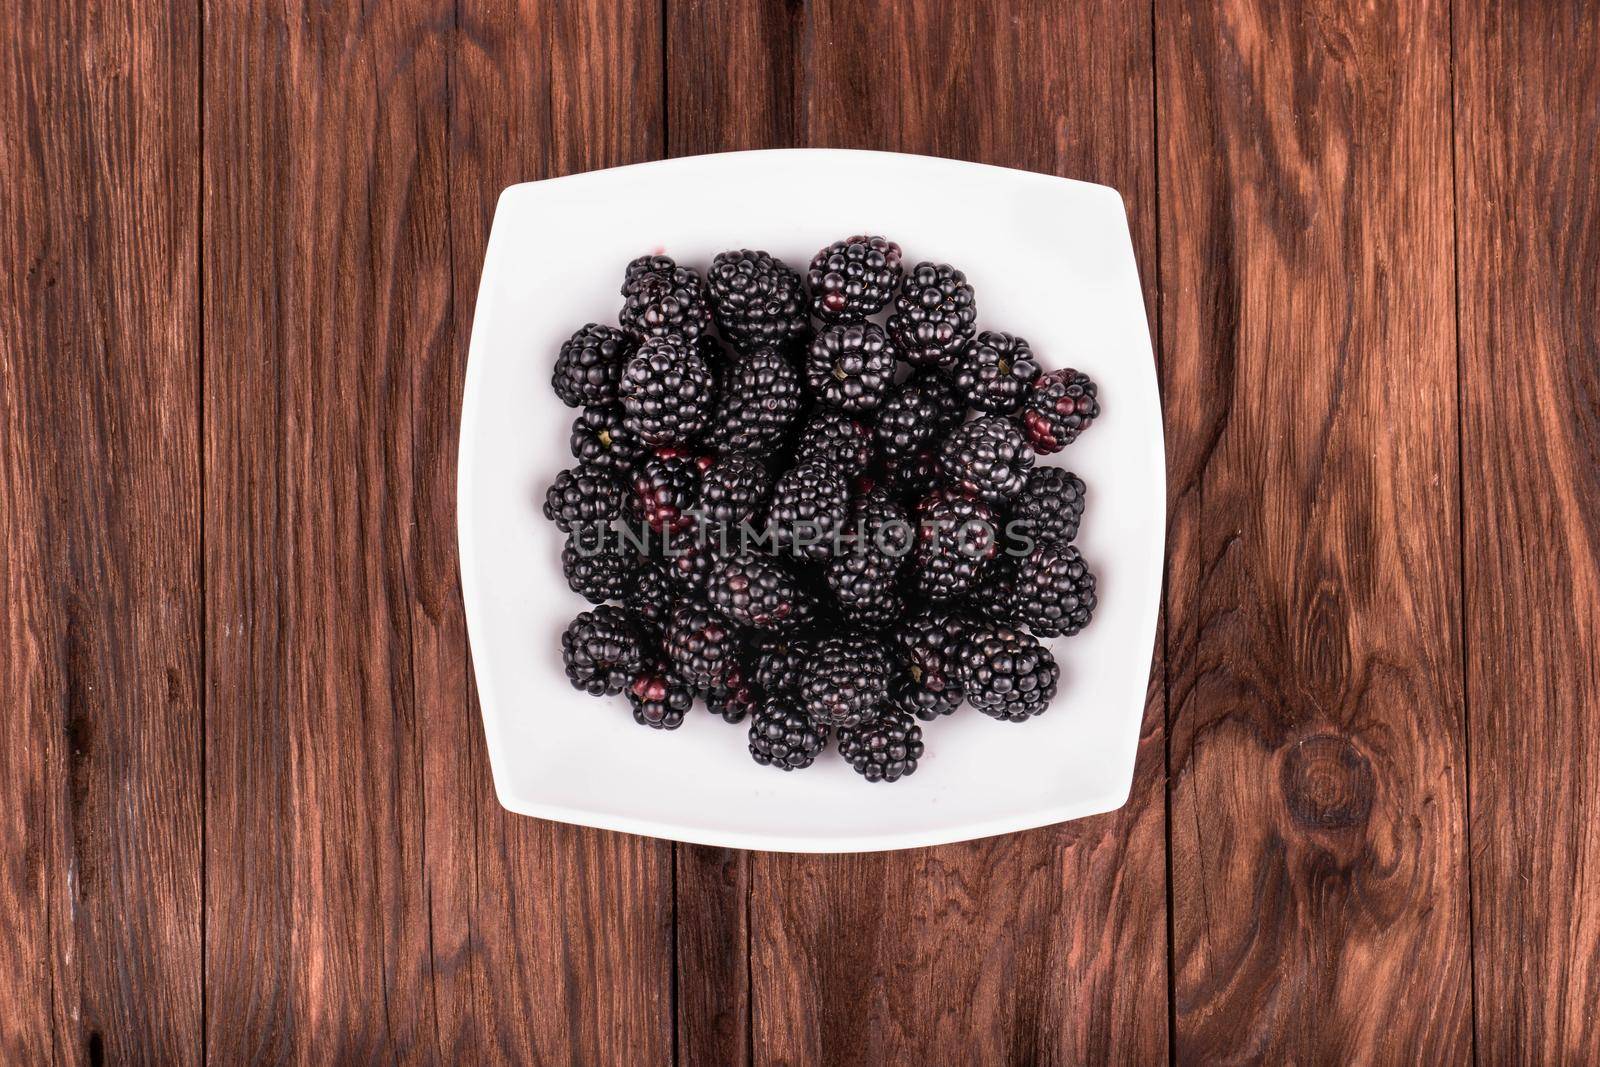 White bowl filled with fresh blackberries on wooden background top view